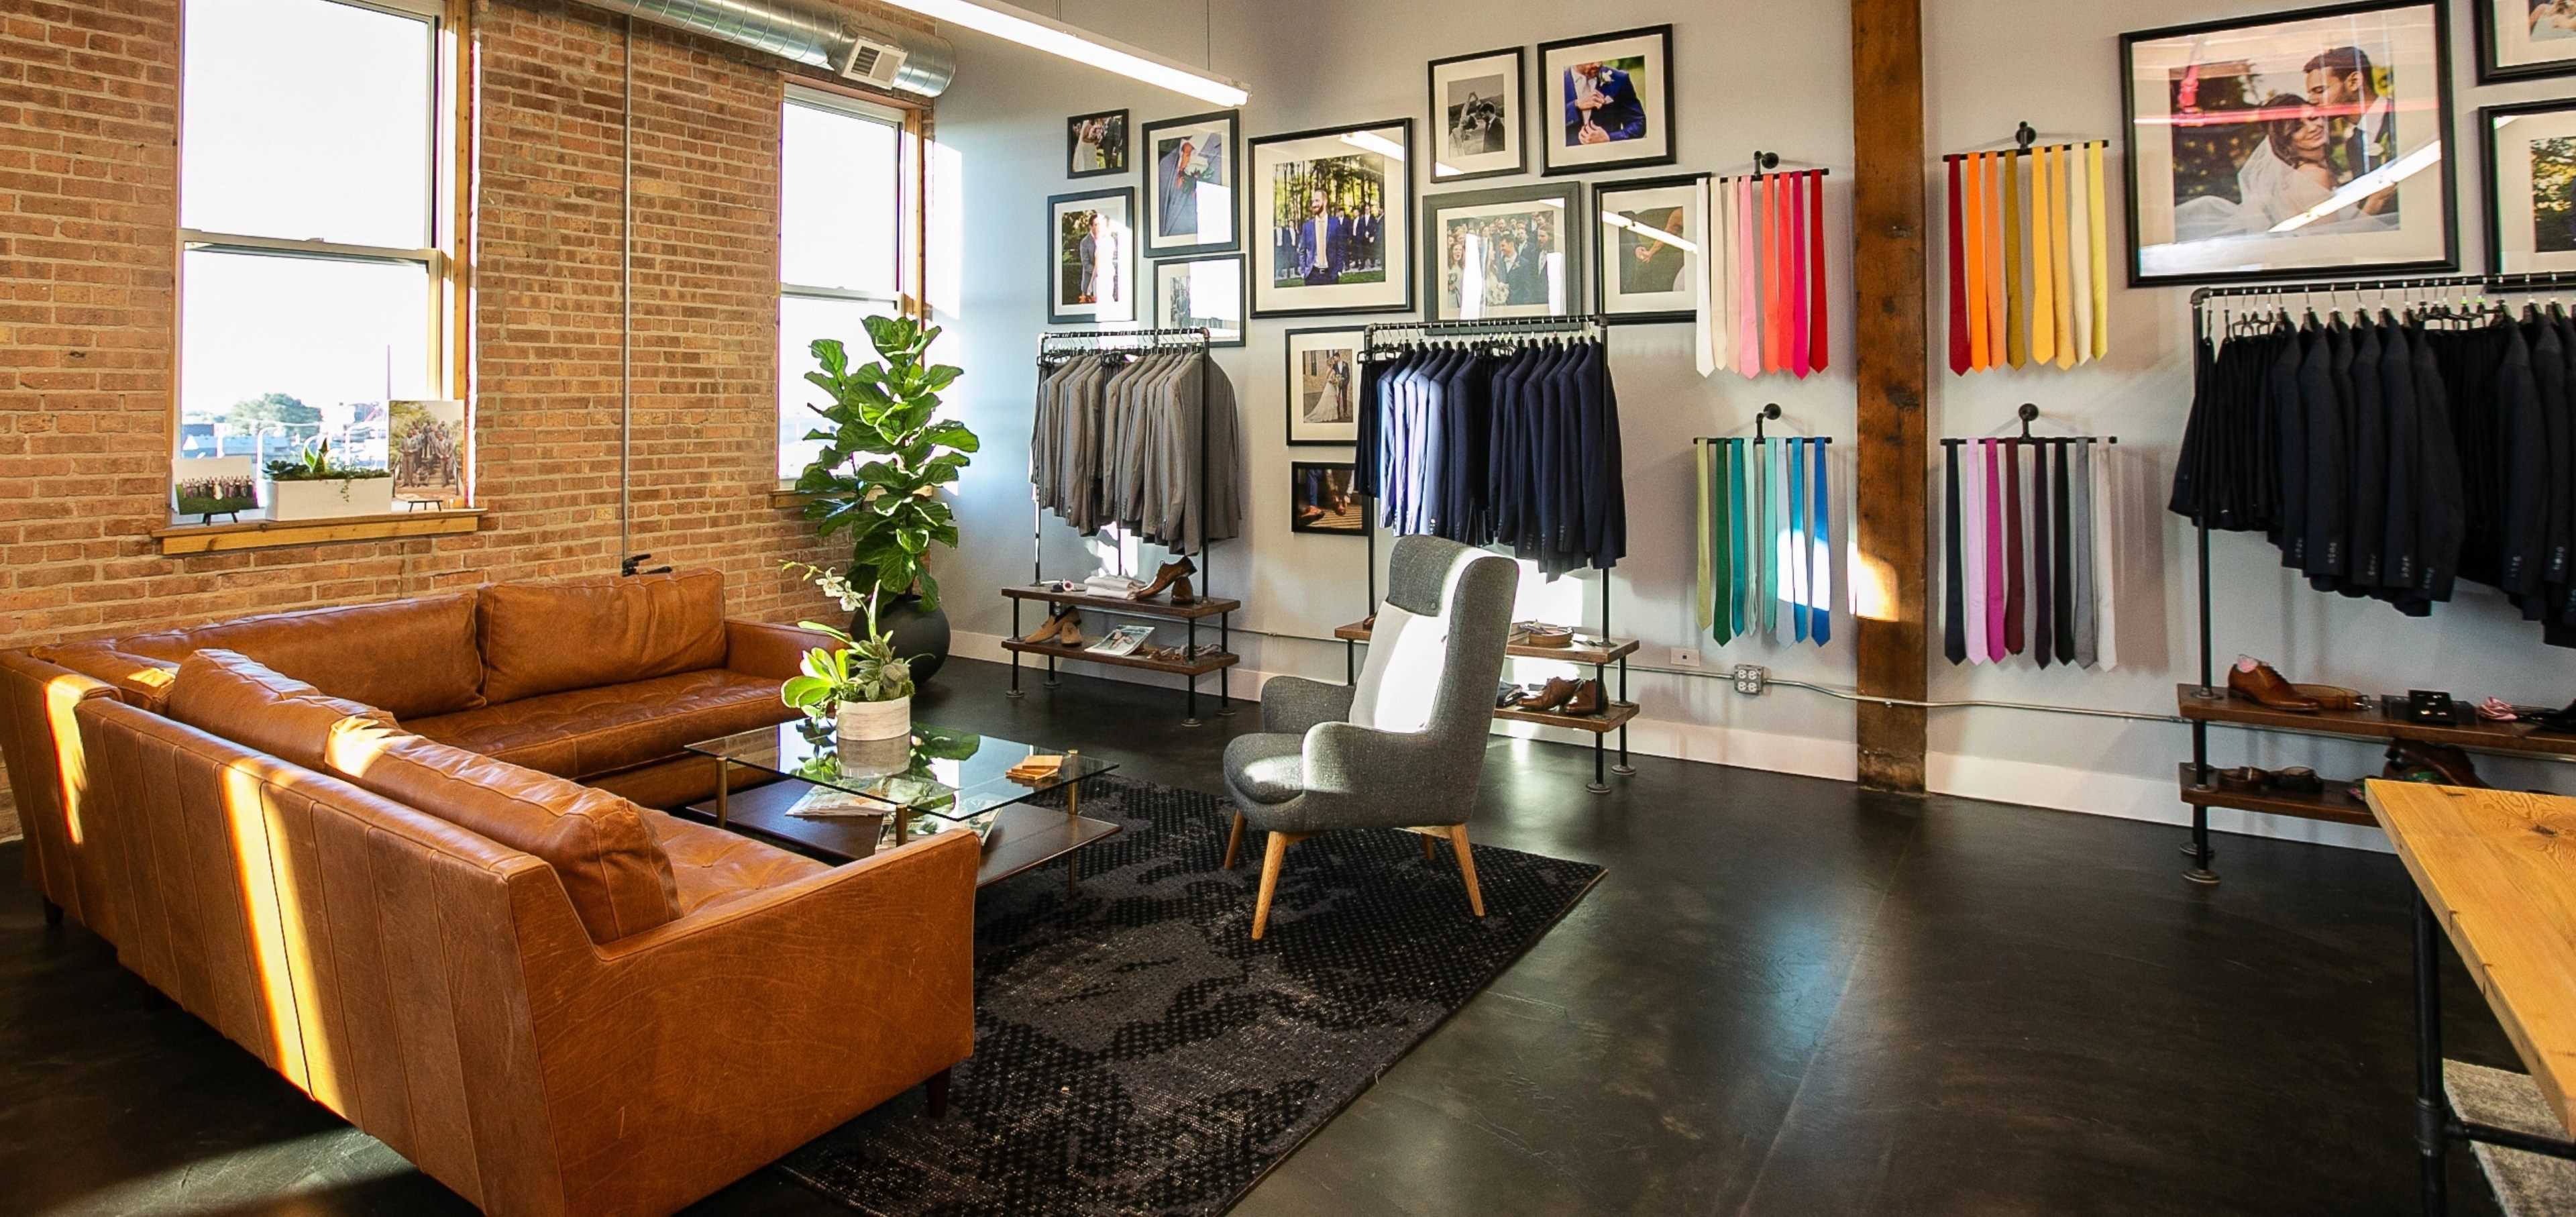 Interior of suit store with suit jackets, pants, shoes, colorful accessories, and lounge area.